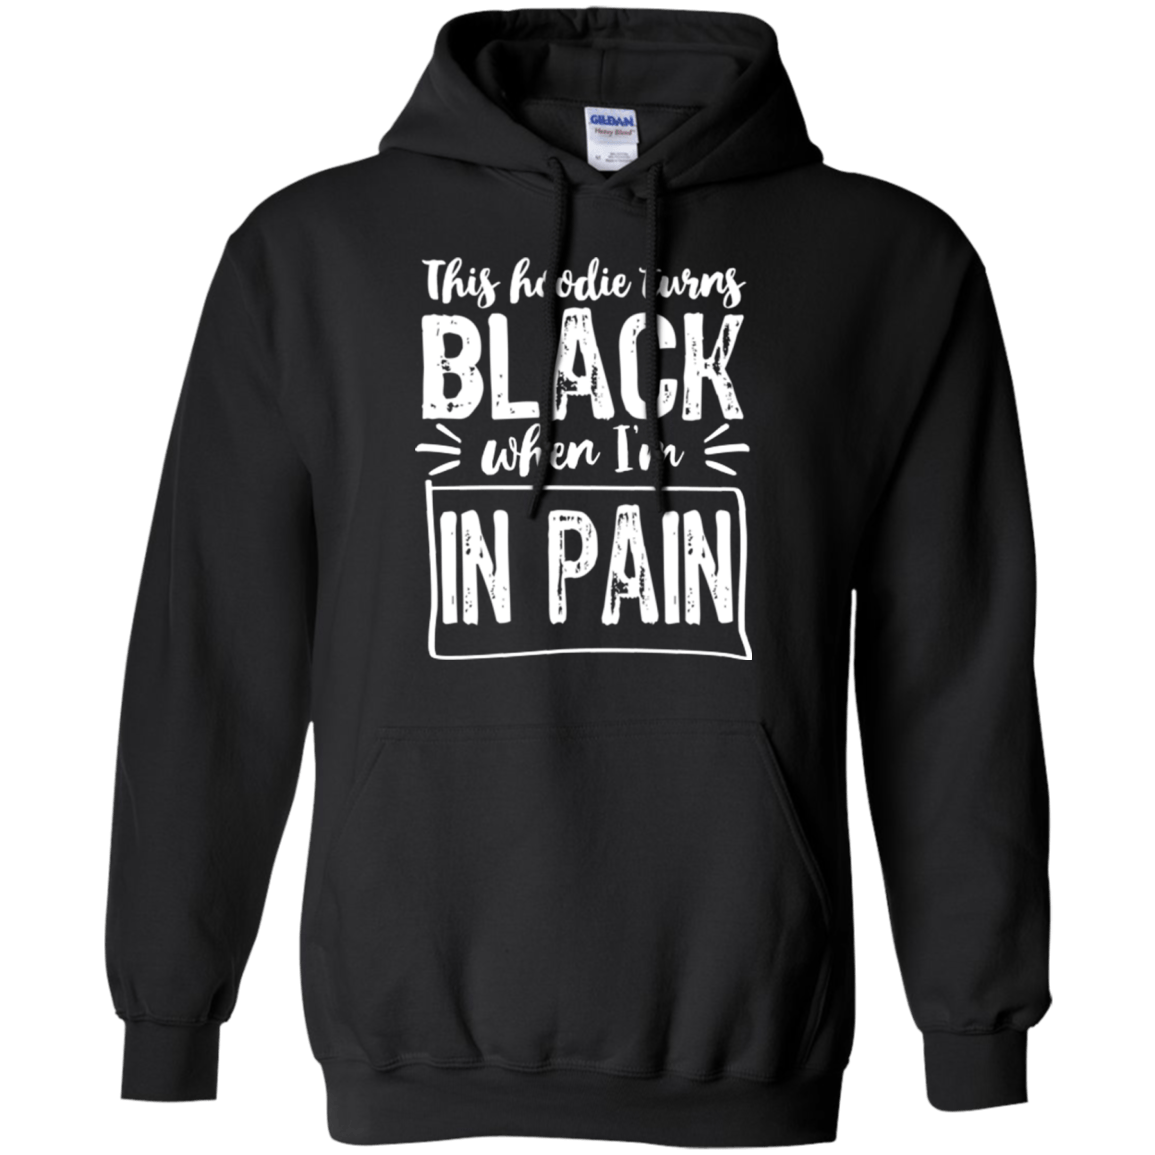 Hoodie Turns Black When In Pain Pullover Hoodie 8 oz. - The Unchargeables